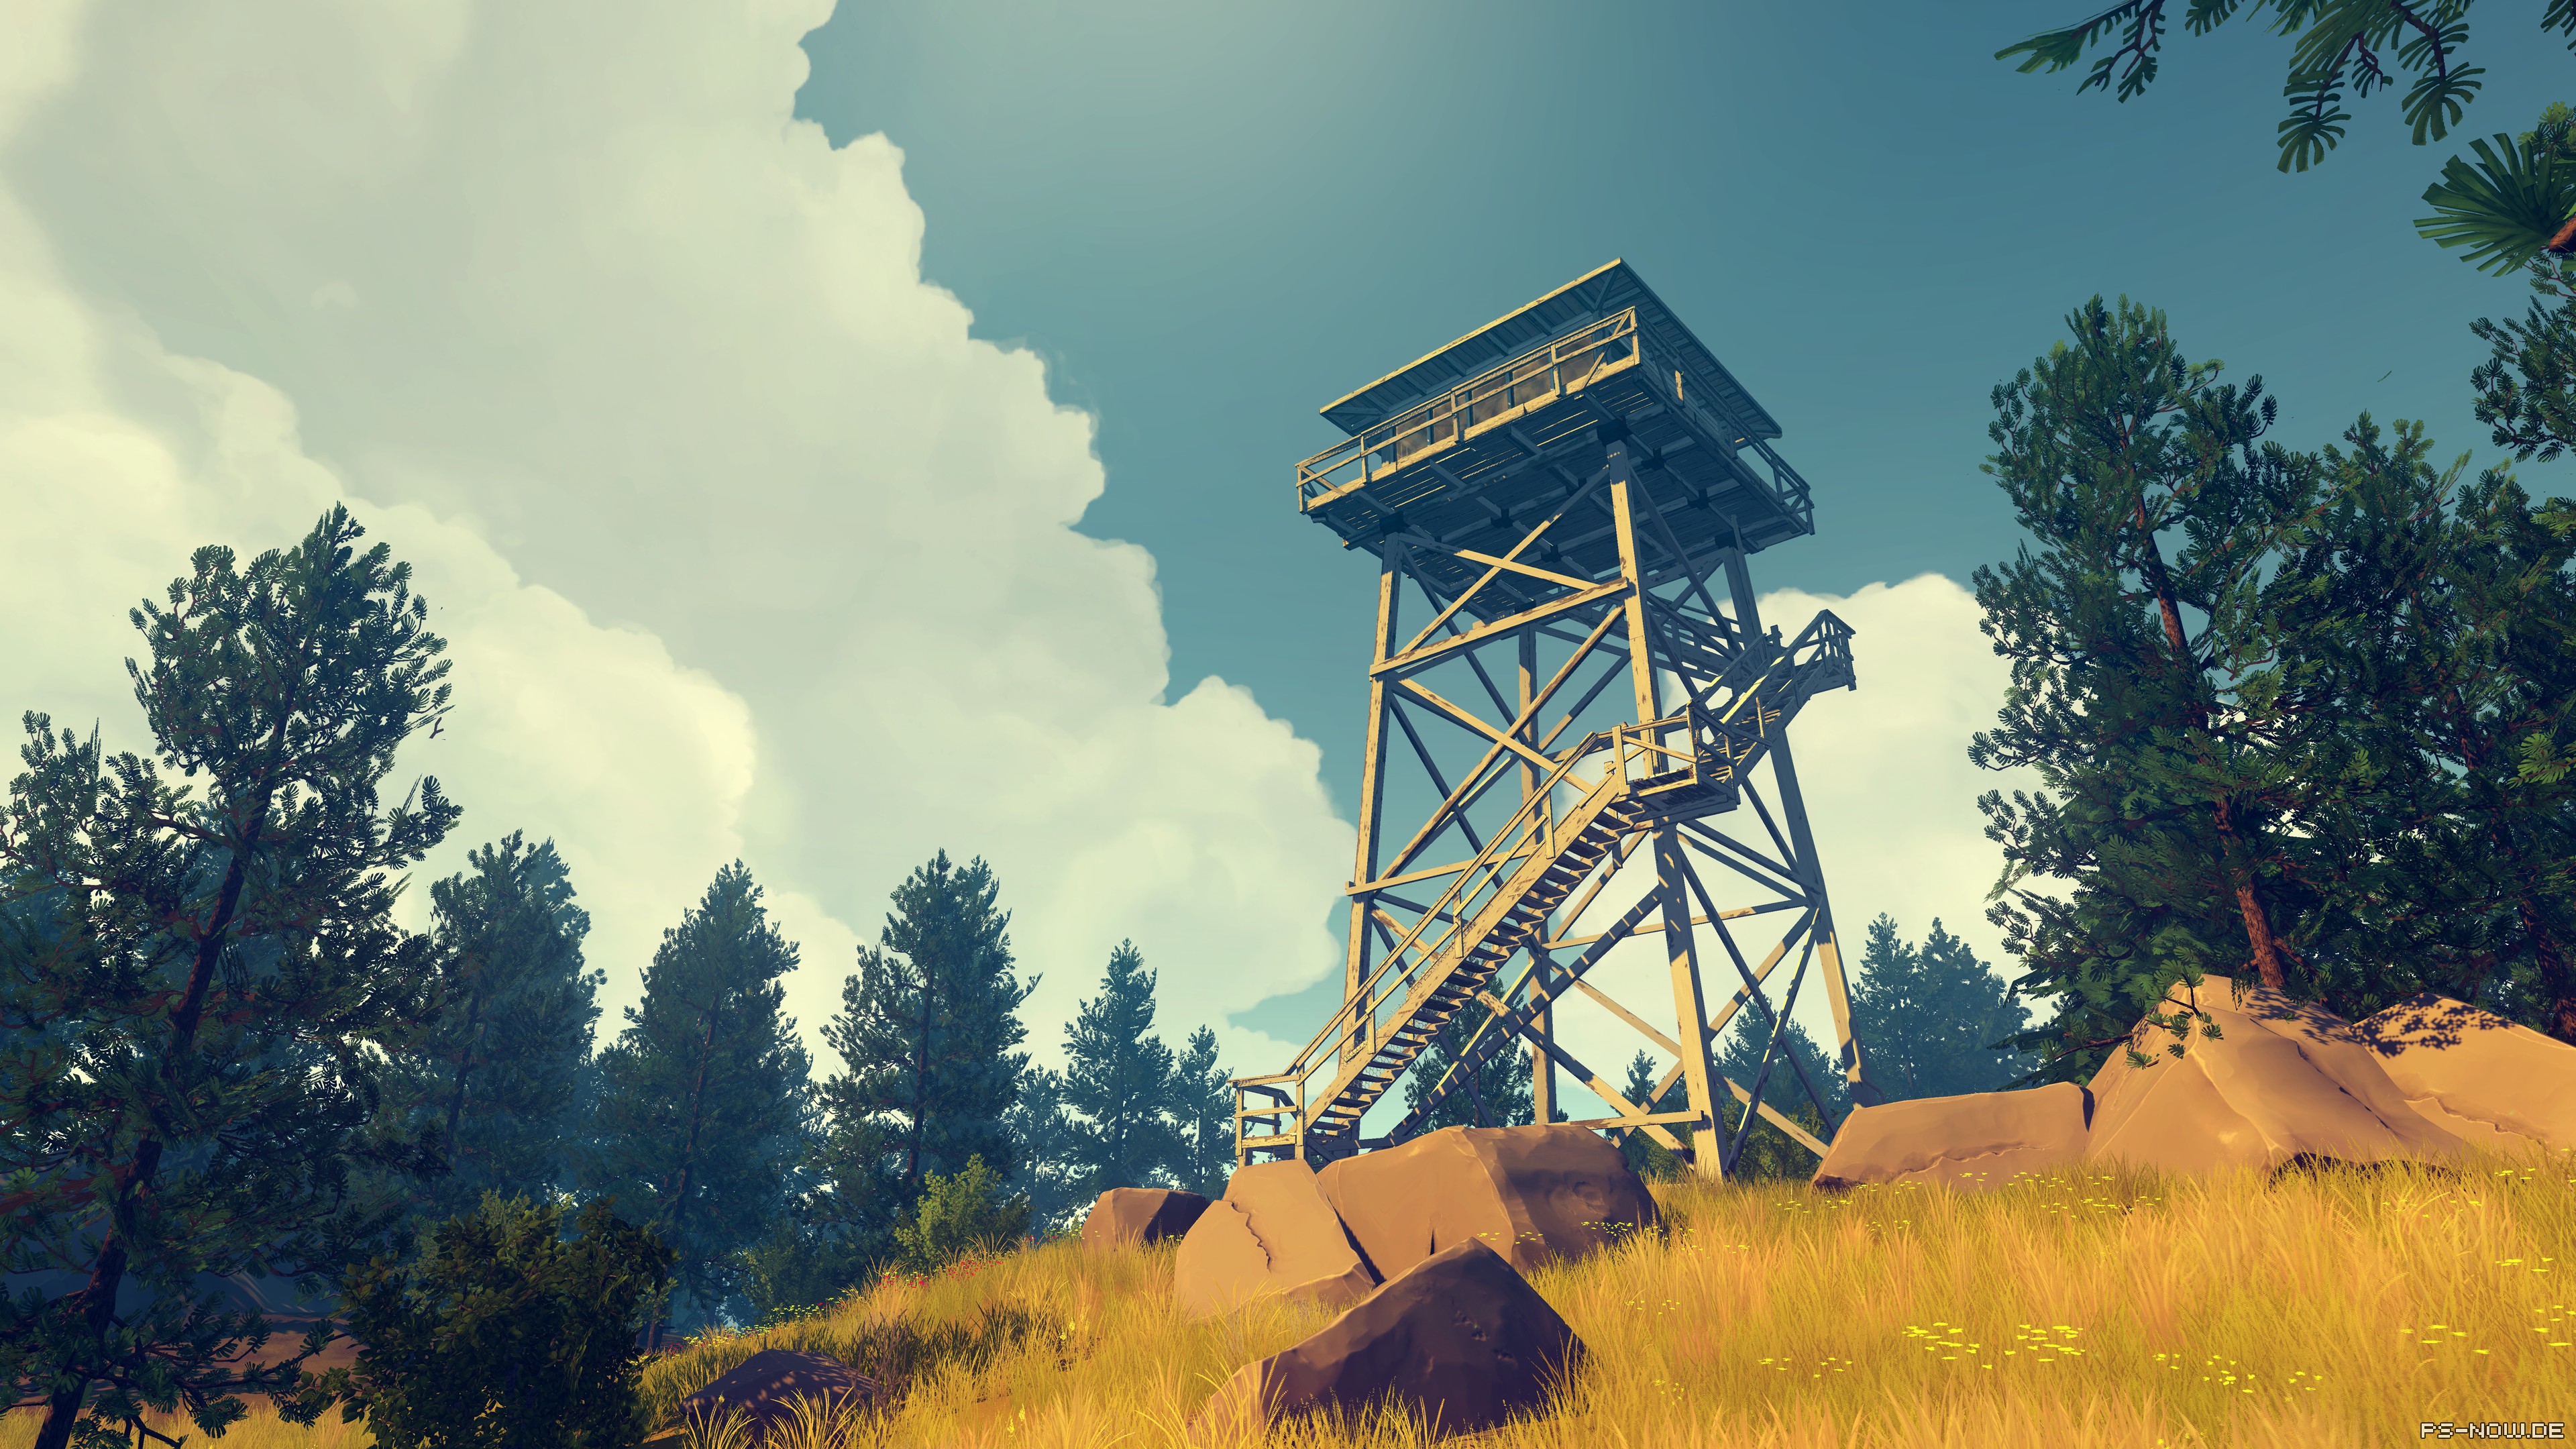 General 3840x2160 video games Firewatch video game art nature trees forest clouds sky illustration